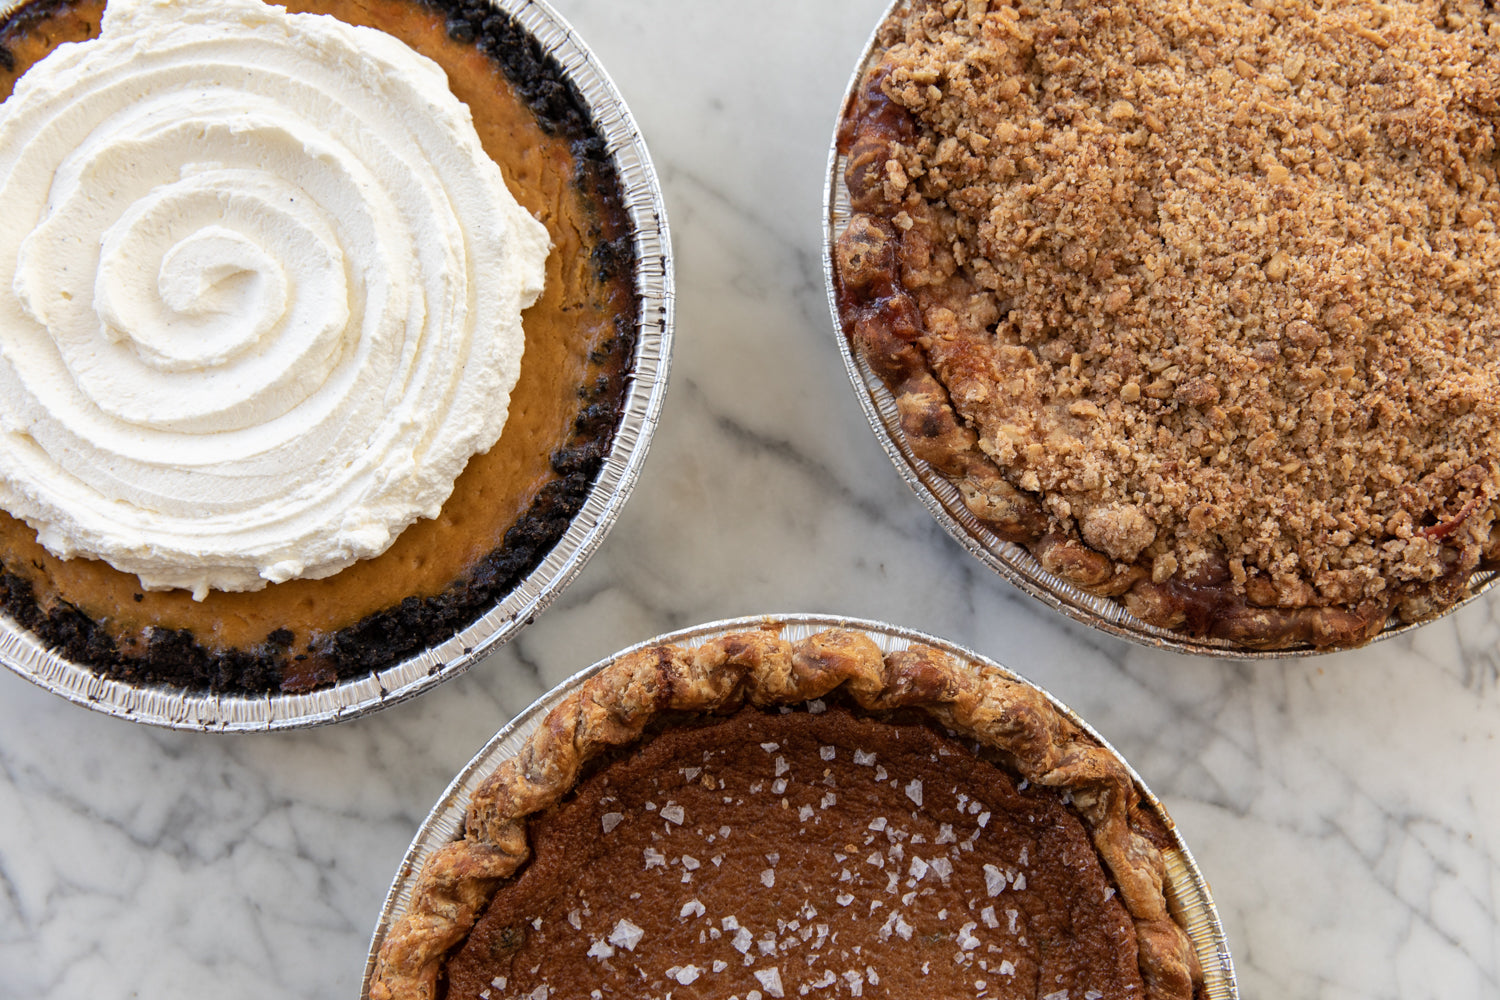 Three pies on a marble countertop from top view: a whipped cream topped pumpkin pie, a crumble-covered apple pie, and a chocolate pie with flaked salt.